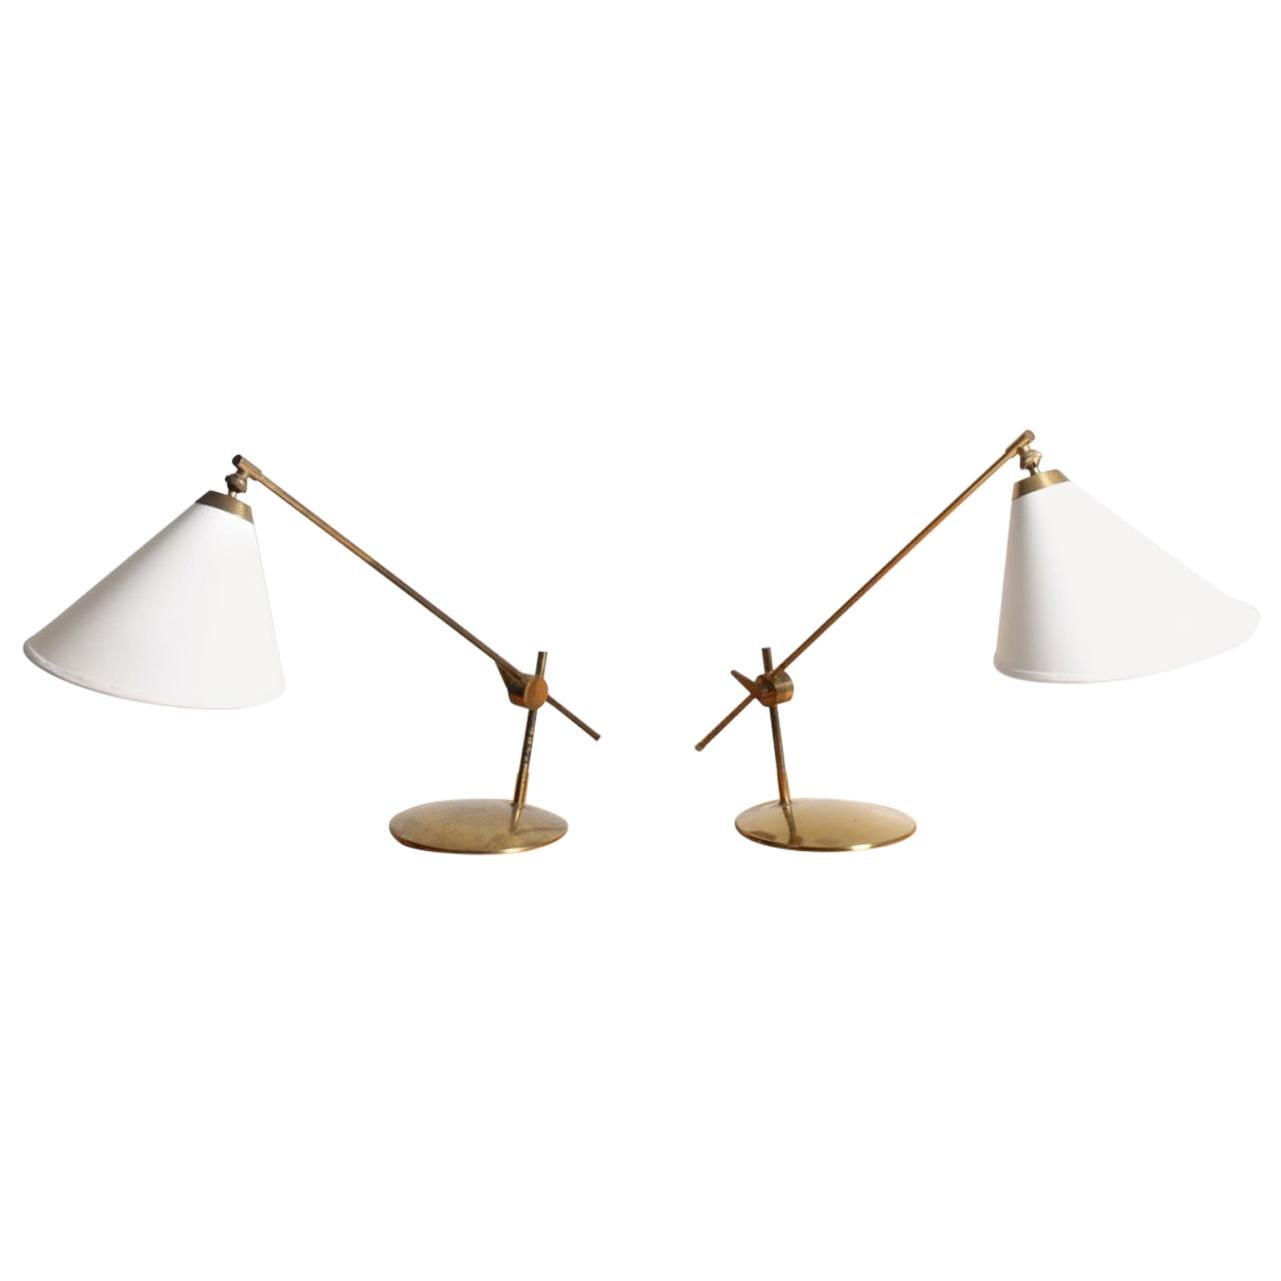 Pair of Adjustable Table Lamps in Brass Designed by Poul Dinesen, 1950s